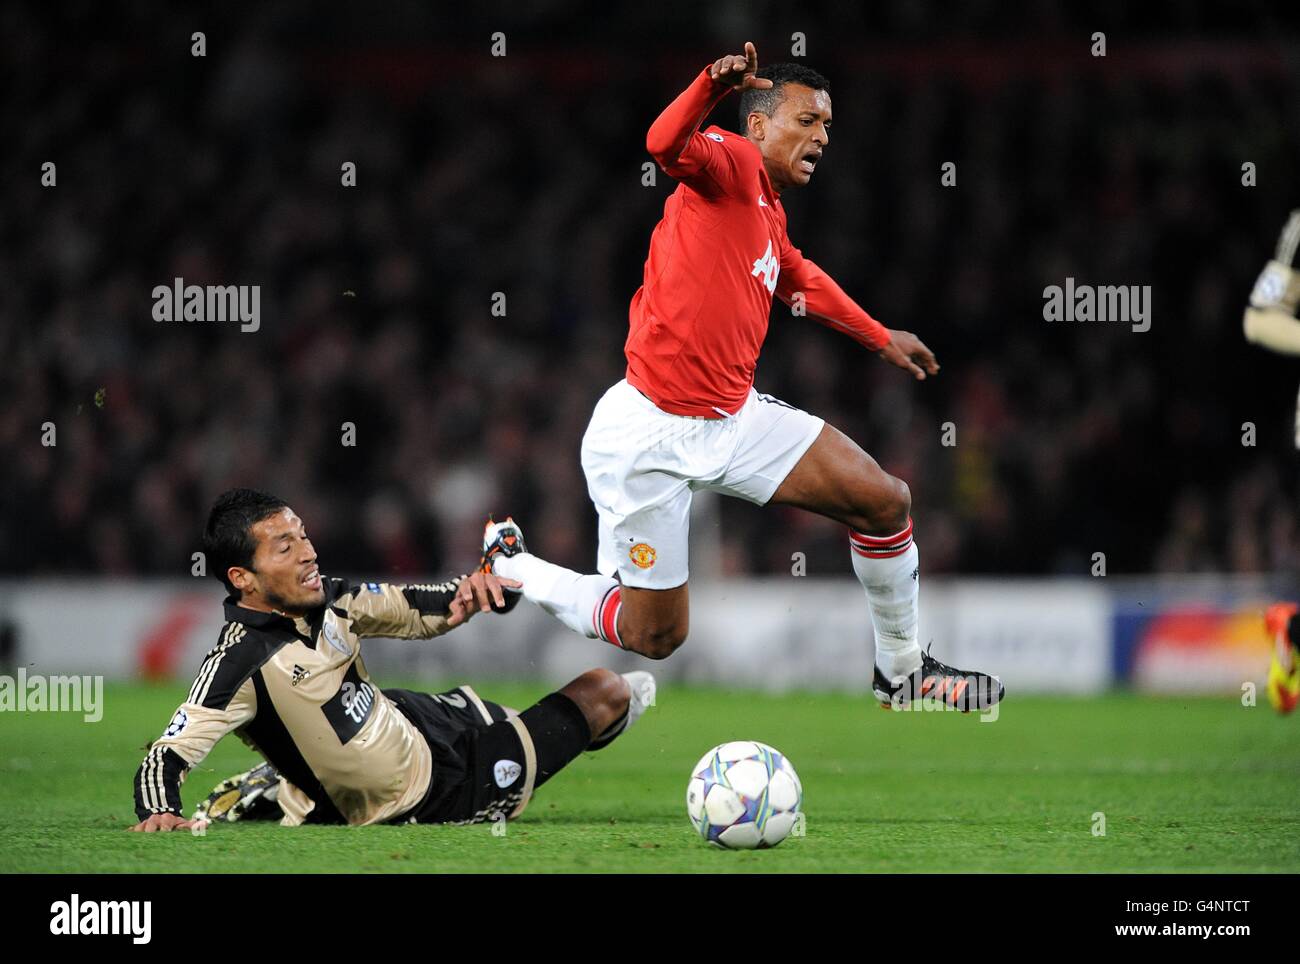 Soccer - UEFA Champions League - Group C - Manchester United v Benfica - Old Trafford Stock Photo